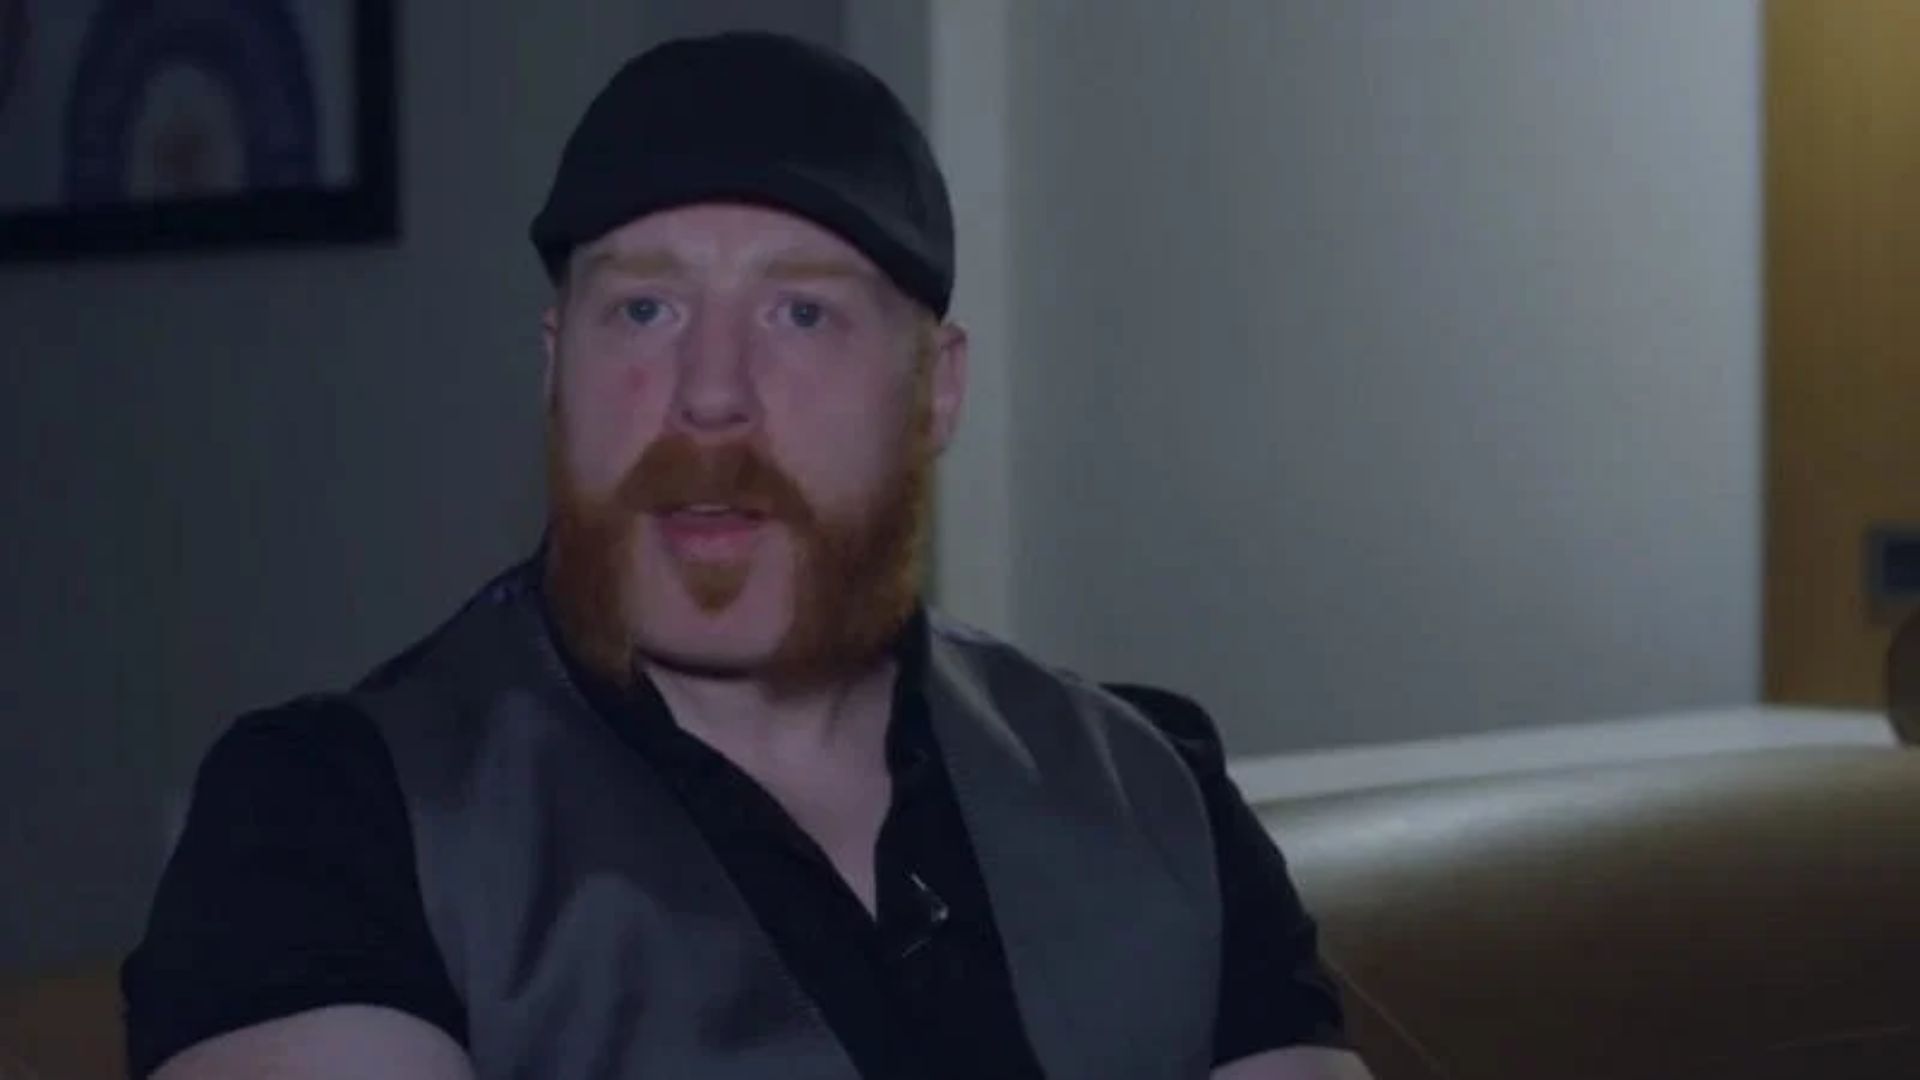 Sheamus held the WWE Championship the year before the 2016 WWE Draft